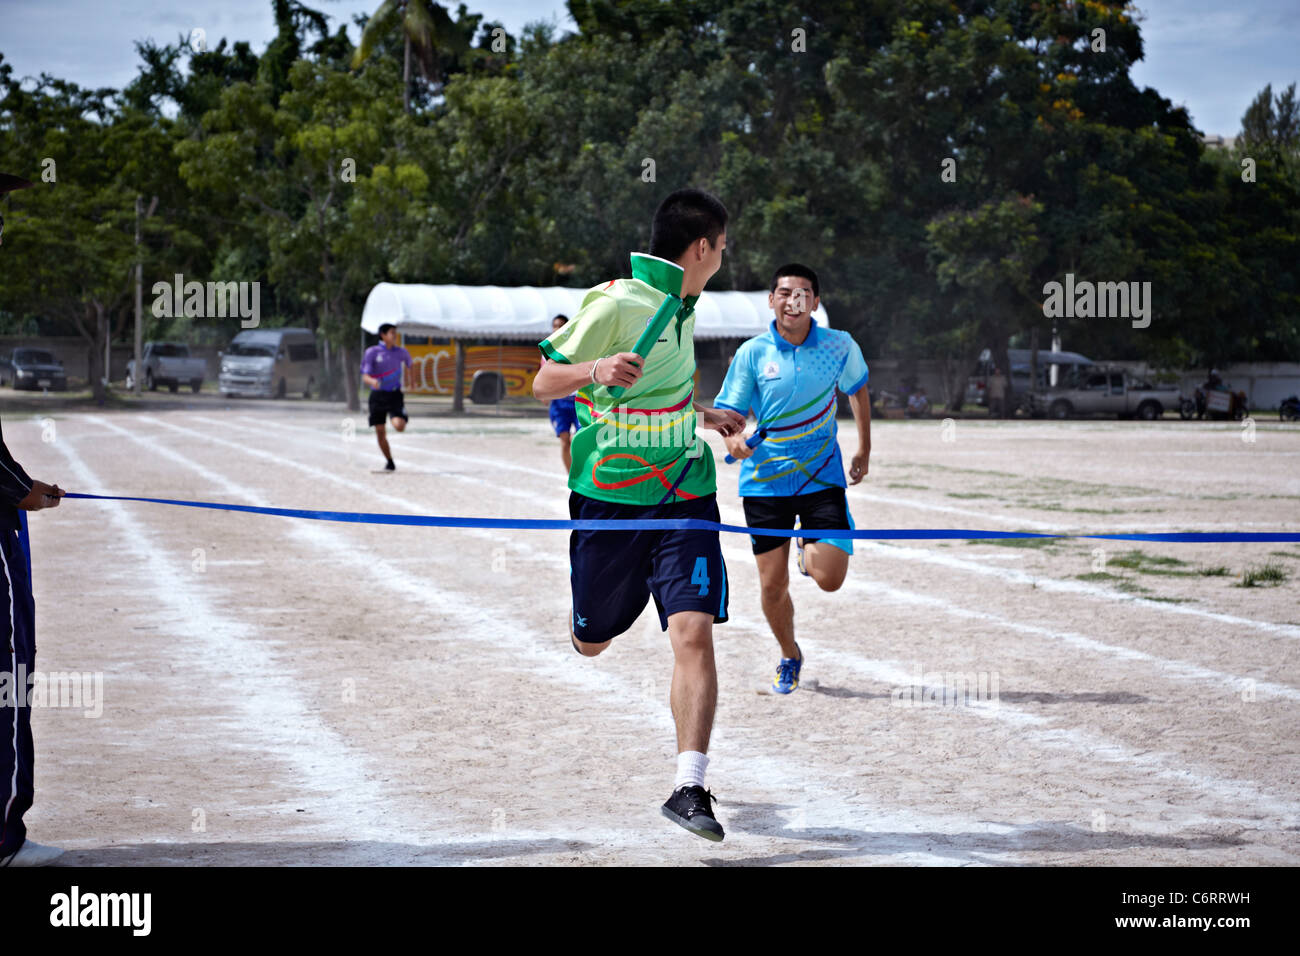 Winner crossing the finishing line at an Asian school sports day event. Thailand S. E. Asia Stock Photo